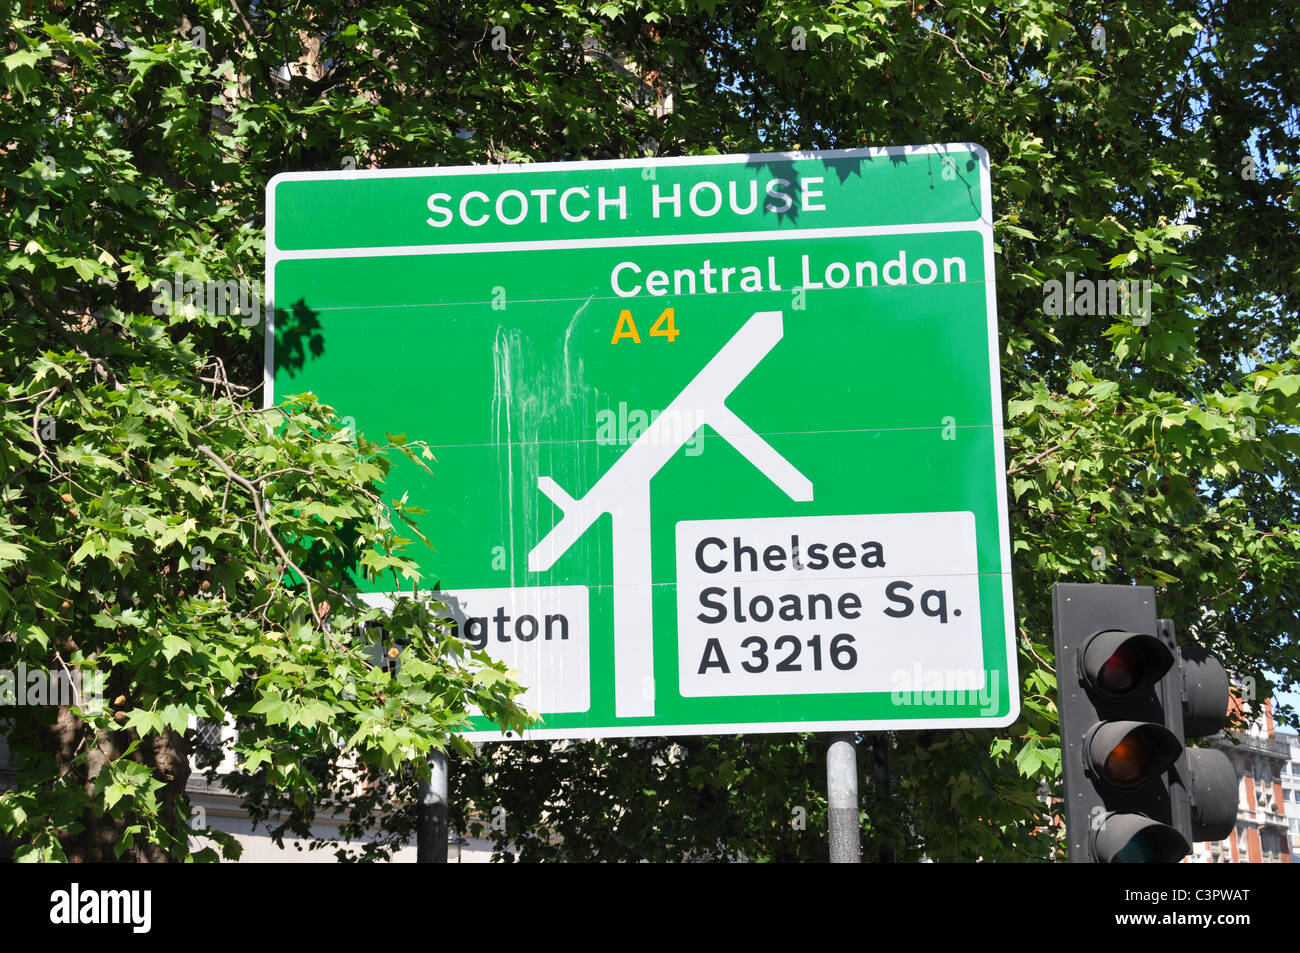 Scotch House street sign Knightsbridge Central London chelsea sloane square street sign traffic taxis Stock Photo